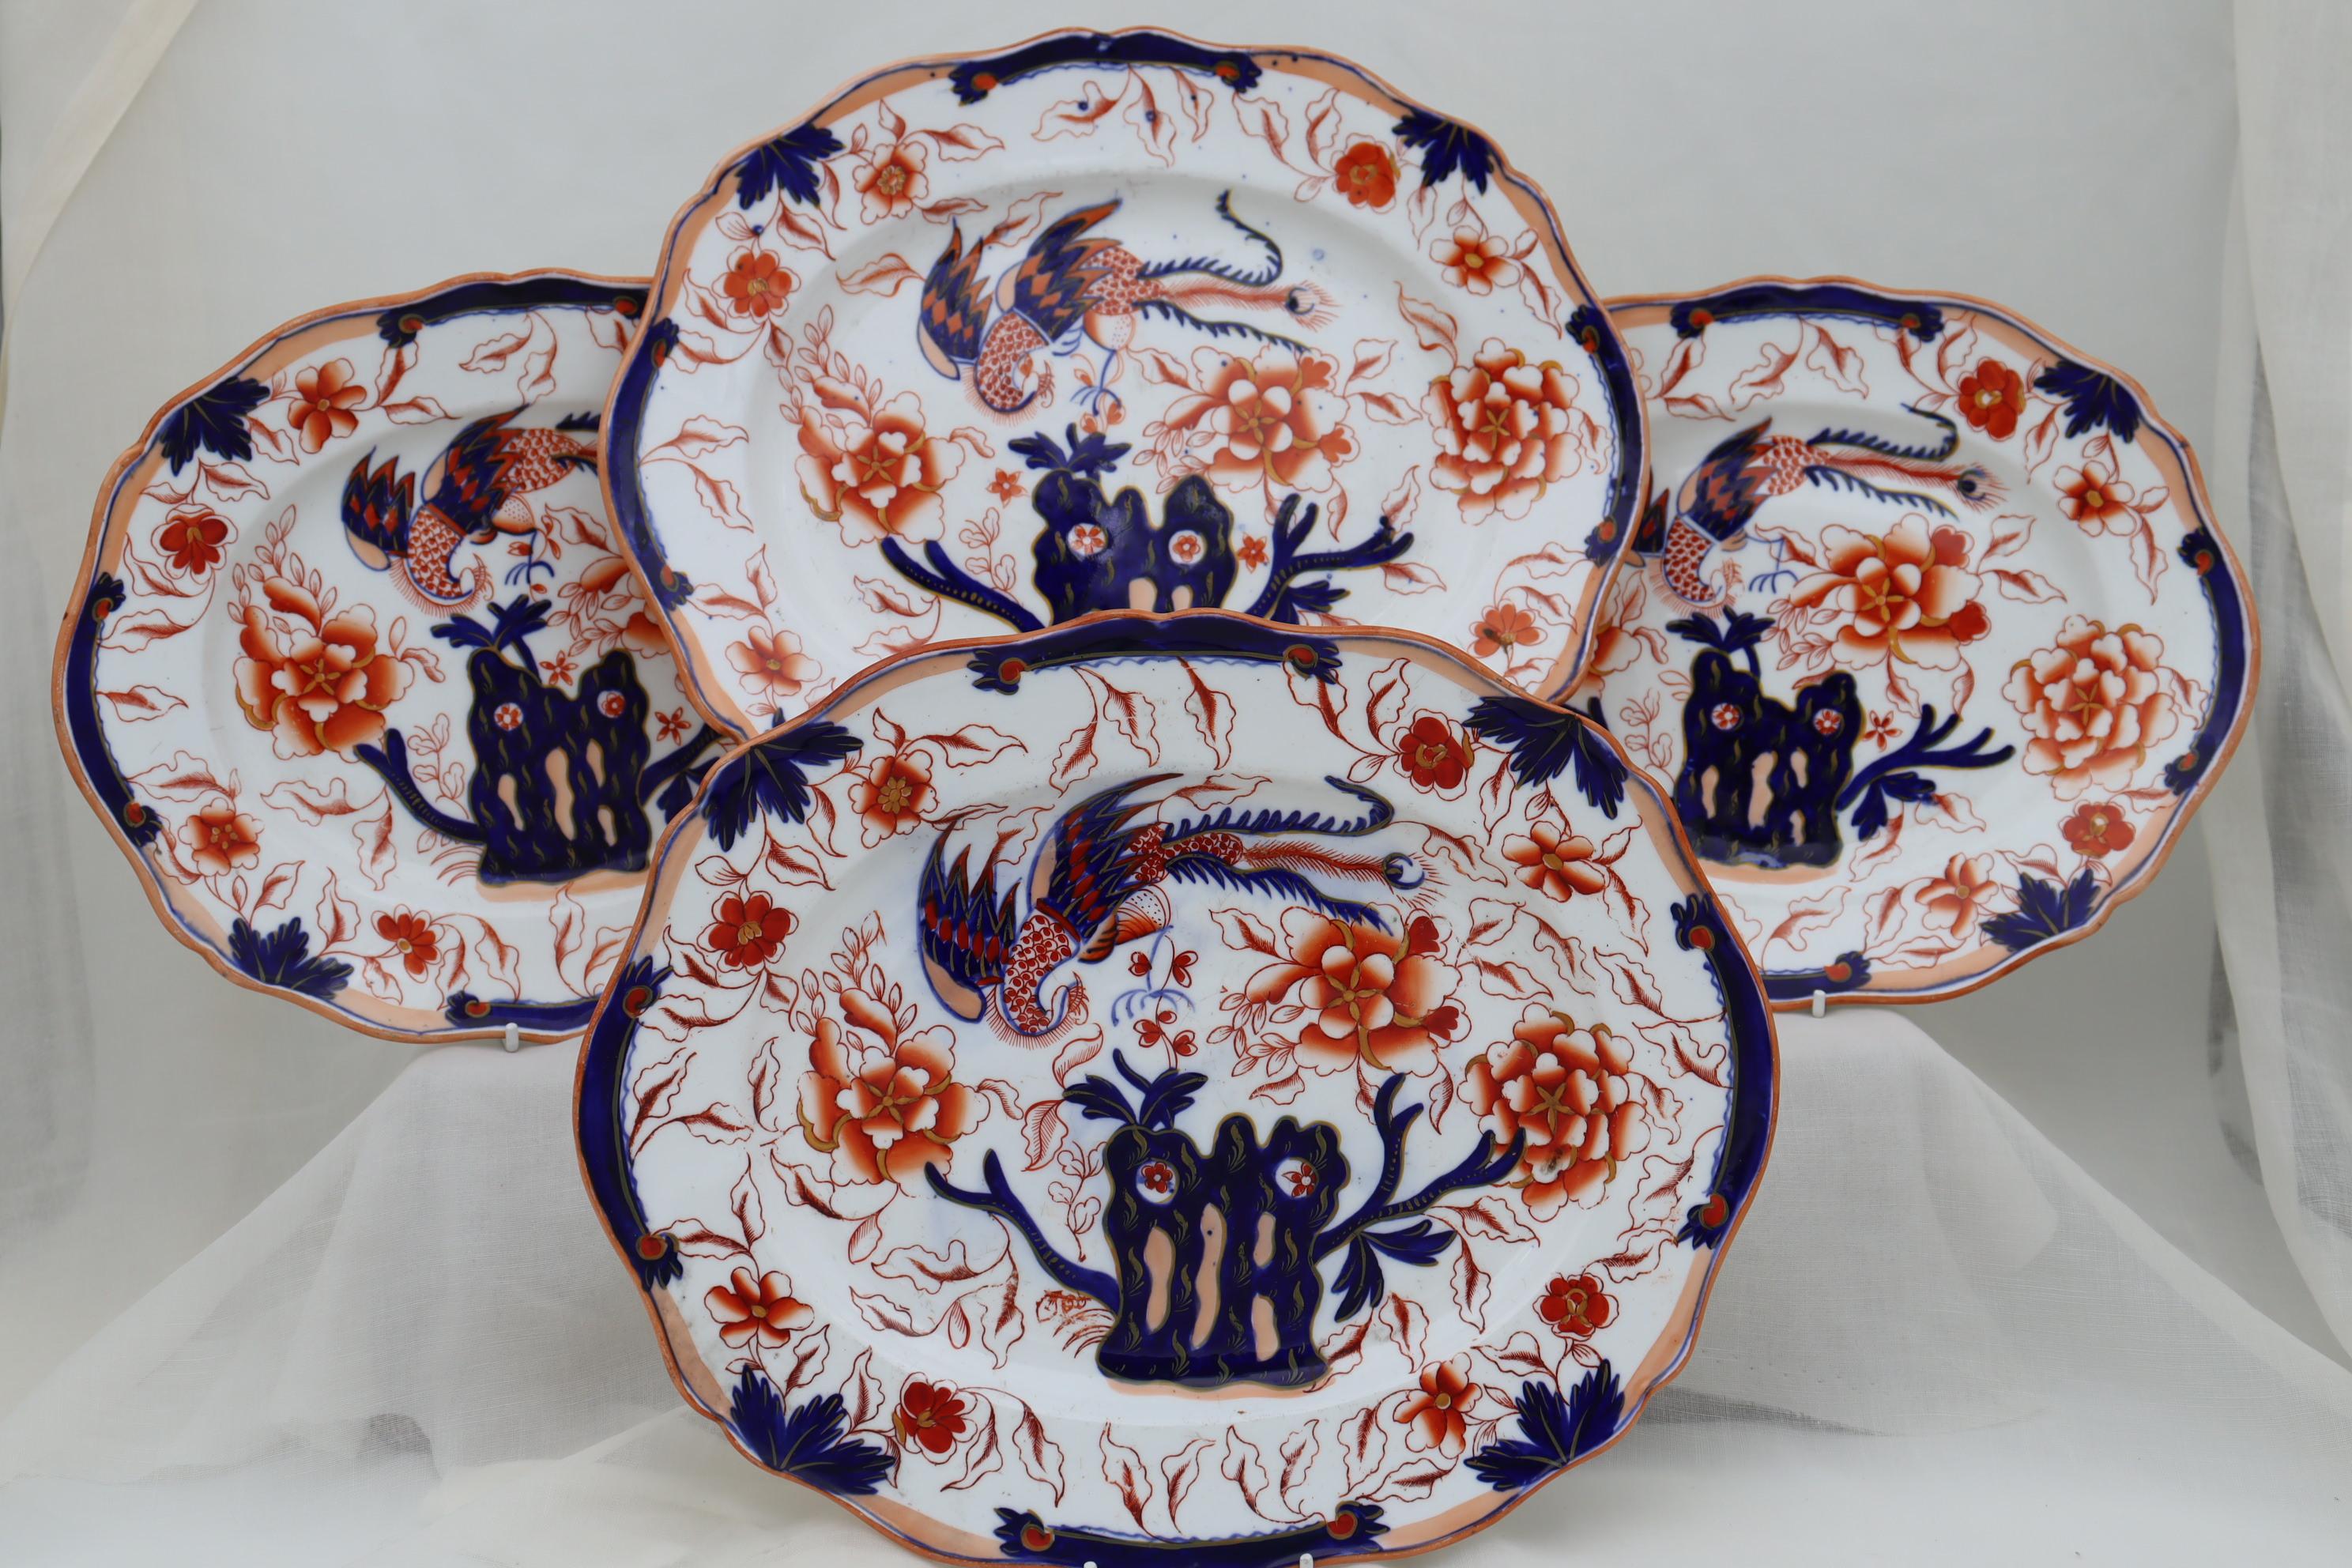 This twenty-three piece porcelain part dinner set consists of 2 larger platters measuring 320 x 26 mm (12.5 x 10.25 inches), 2 smaller platters measuring 285 x 238 mm (11.256 x 9.5 inches), 8 dinner plates 265 mm (10.5 inches) in diameter, 6 bowls